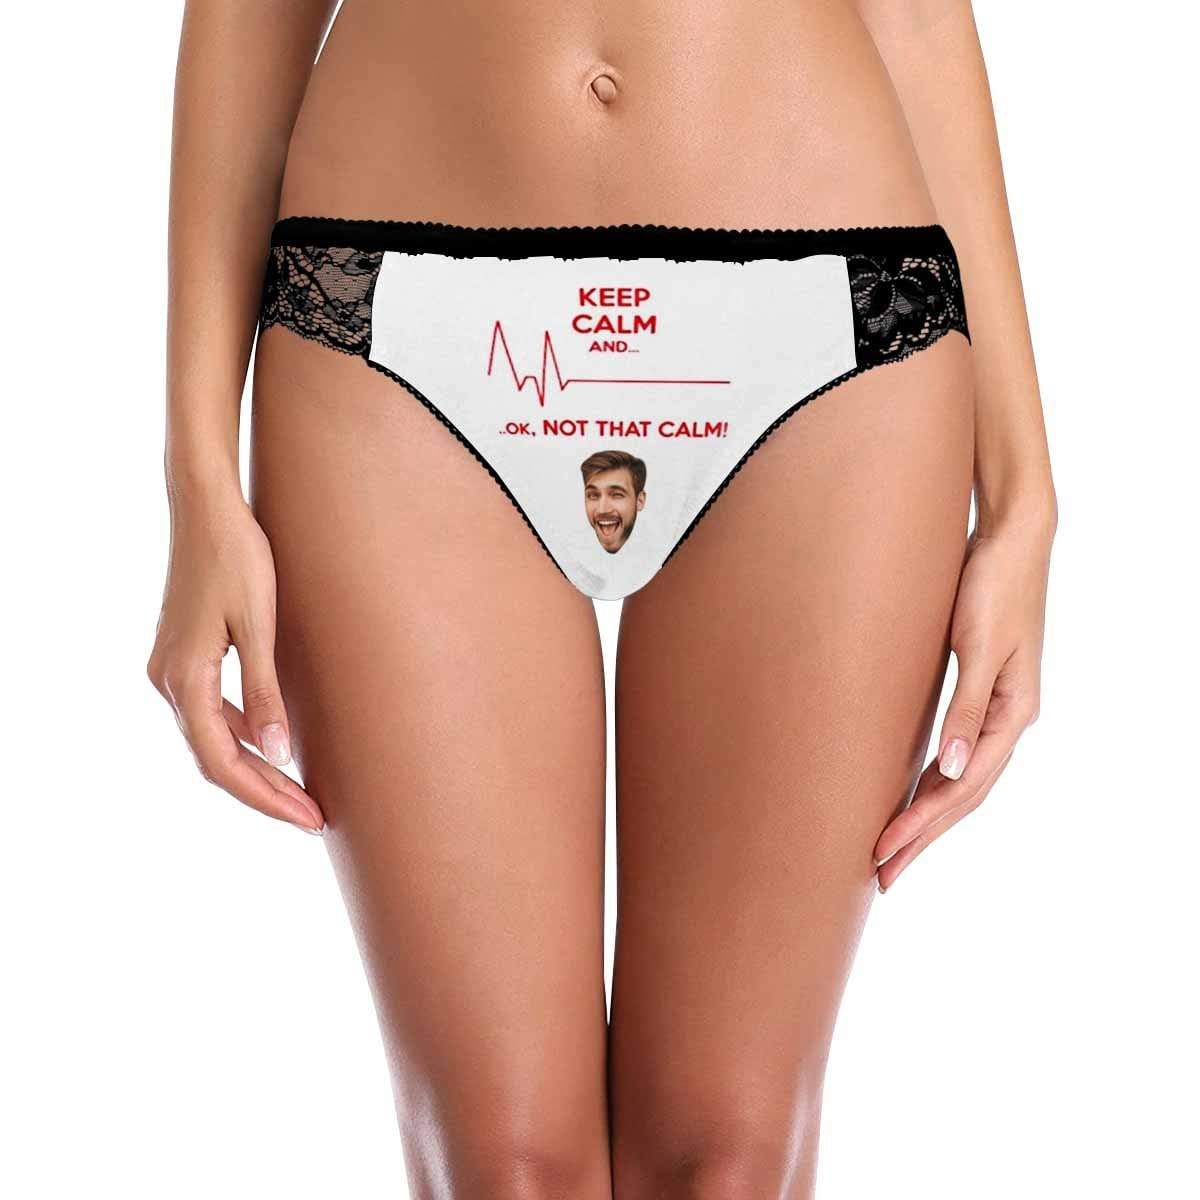 YESCUSTOM Women's Personalised Knickers Sexy Lace Panties, Name